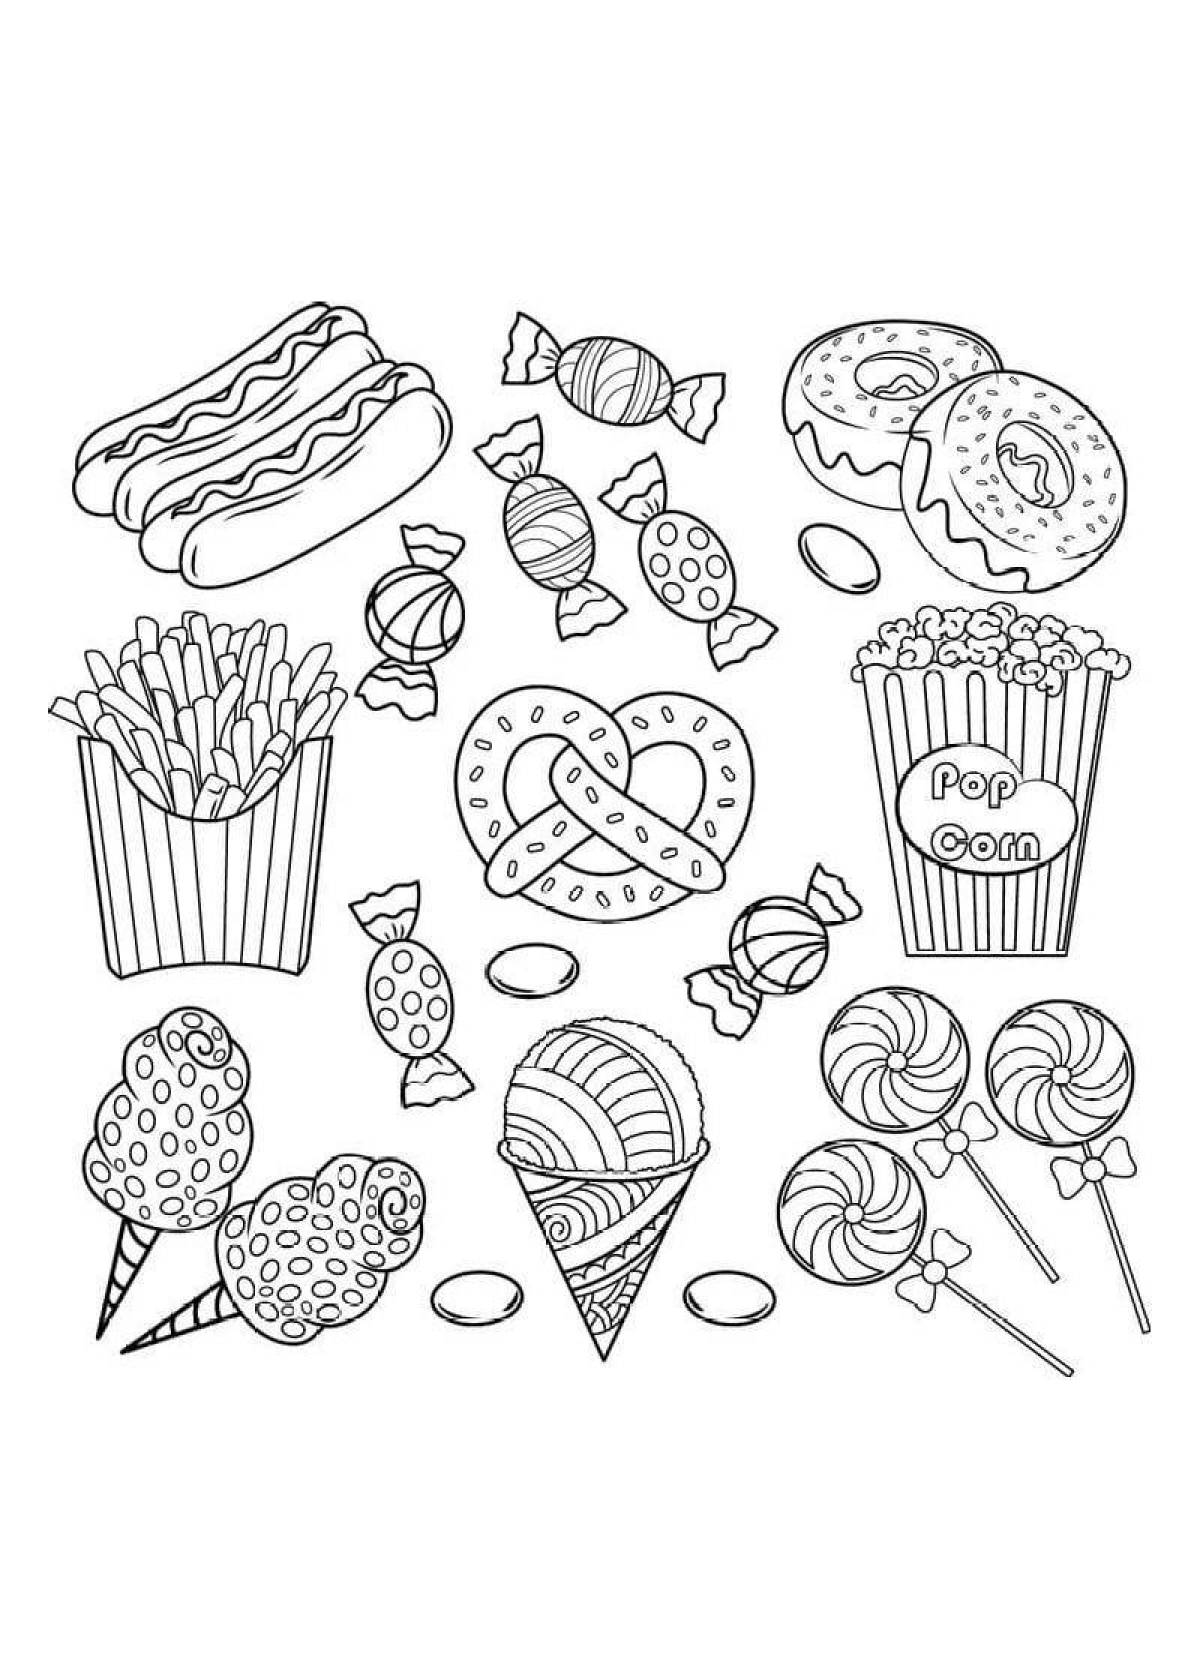 Fun coloring pages of all kinds